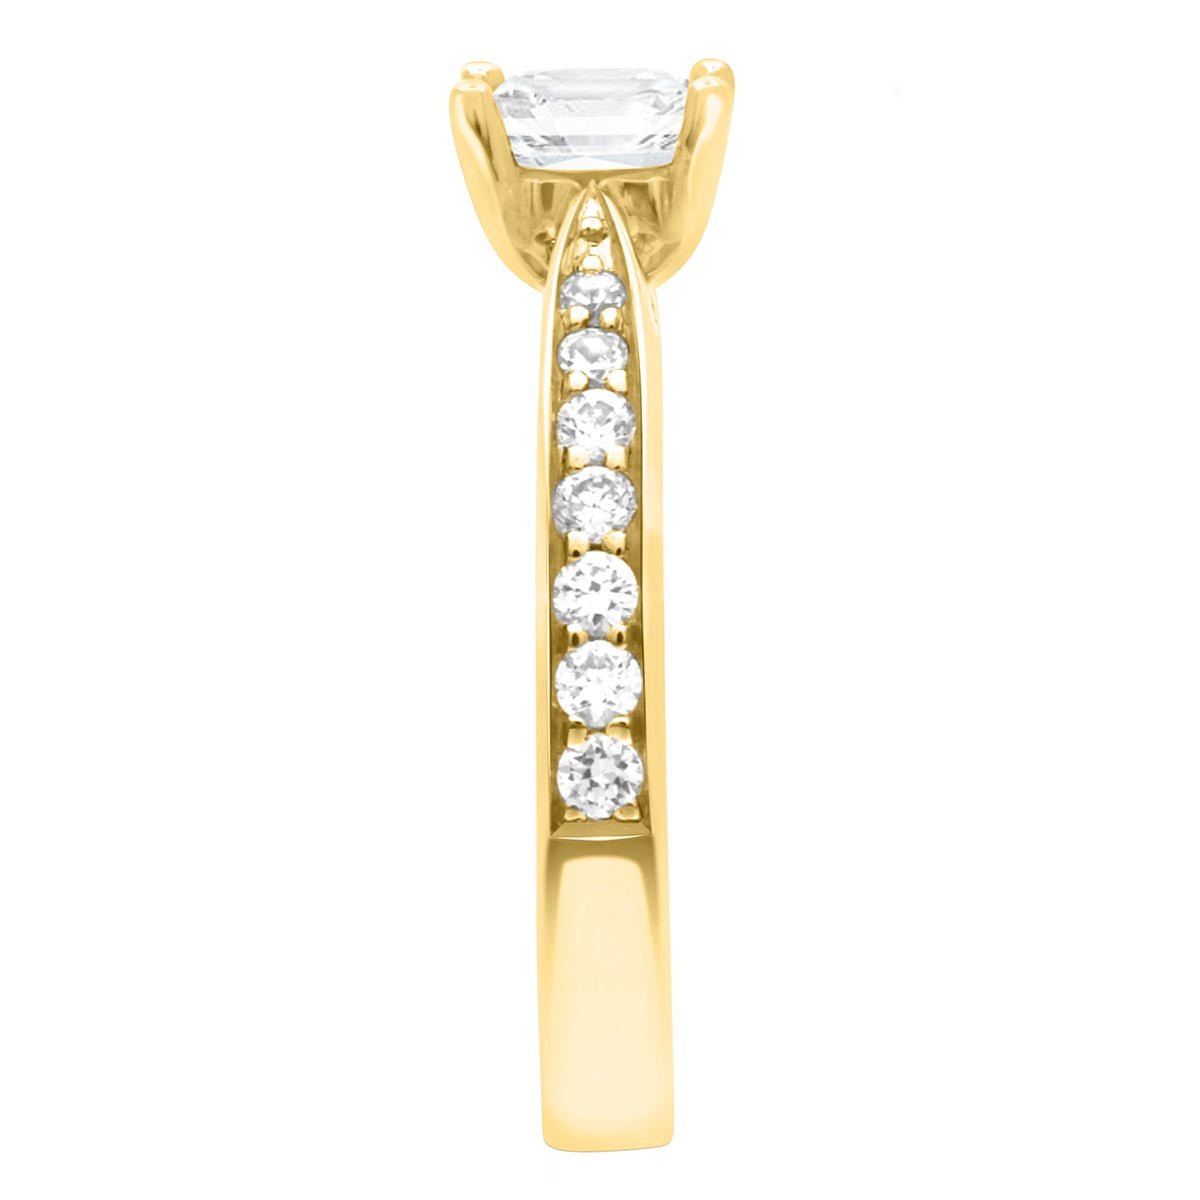 Princess Cut Diamond Solitaire with tapered diamond band in yellow gold in an end view